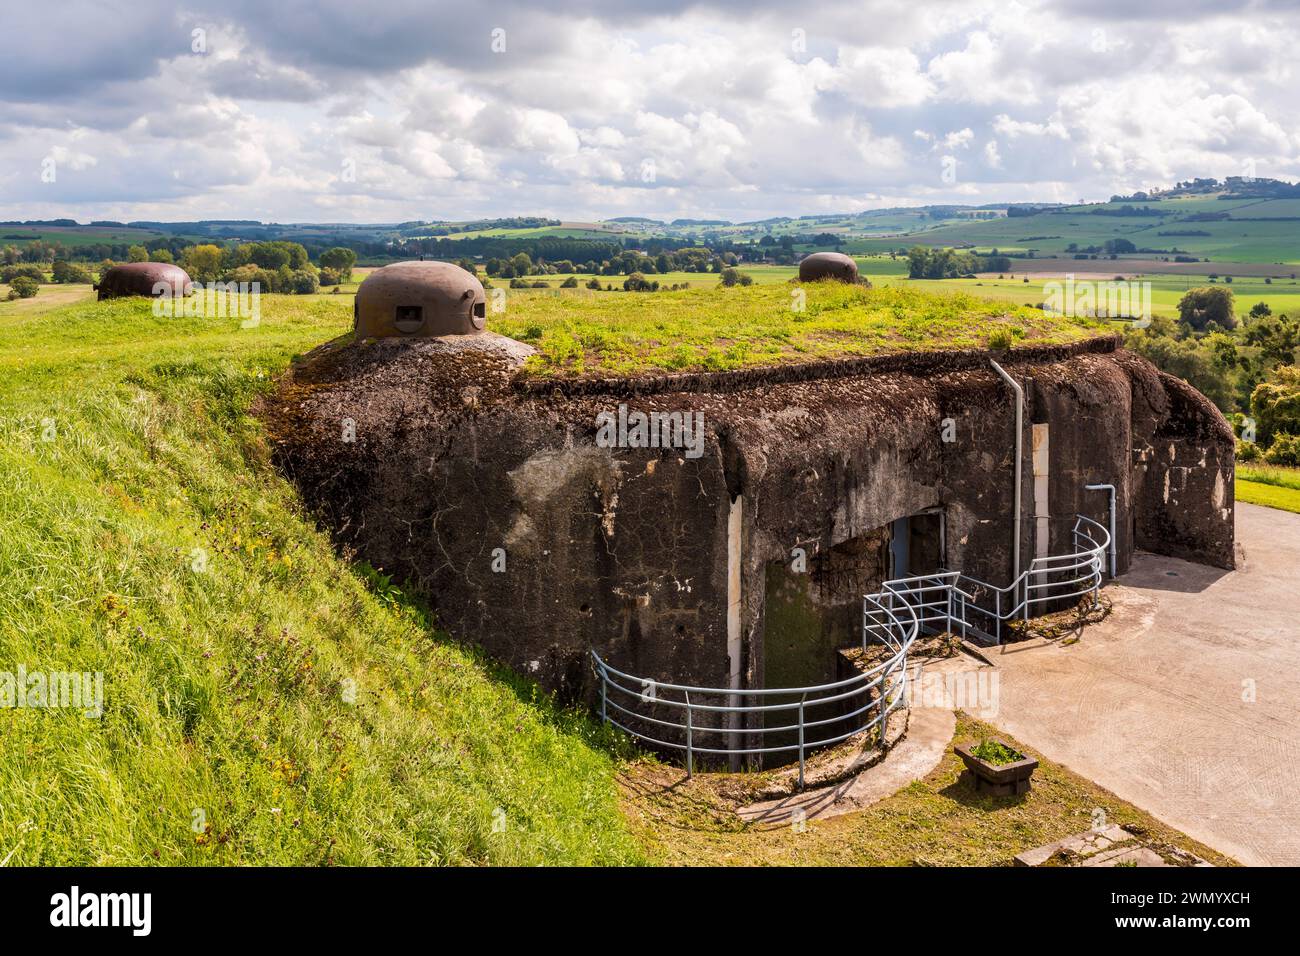 Combat block 1 of the ouvrage de La Ferté in Villy, France, part of the Maginot Line built by France along the Belgian border in the '30s. Stock Photo